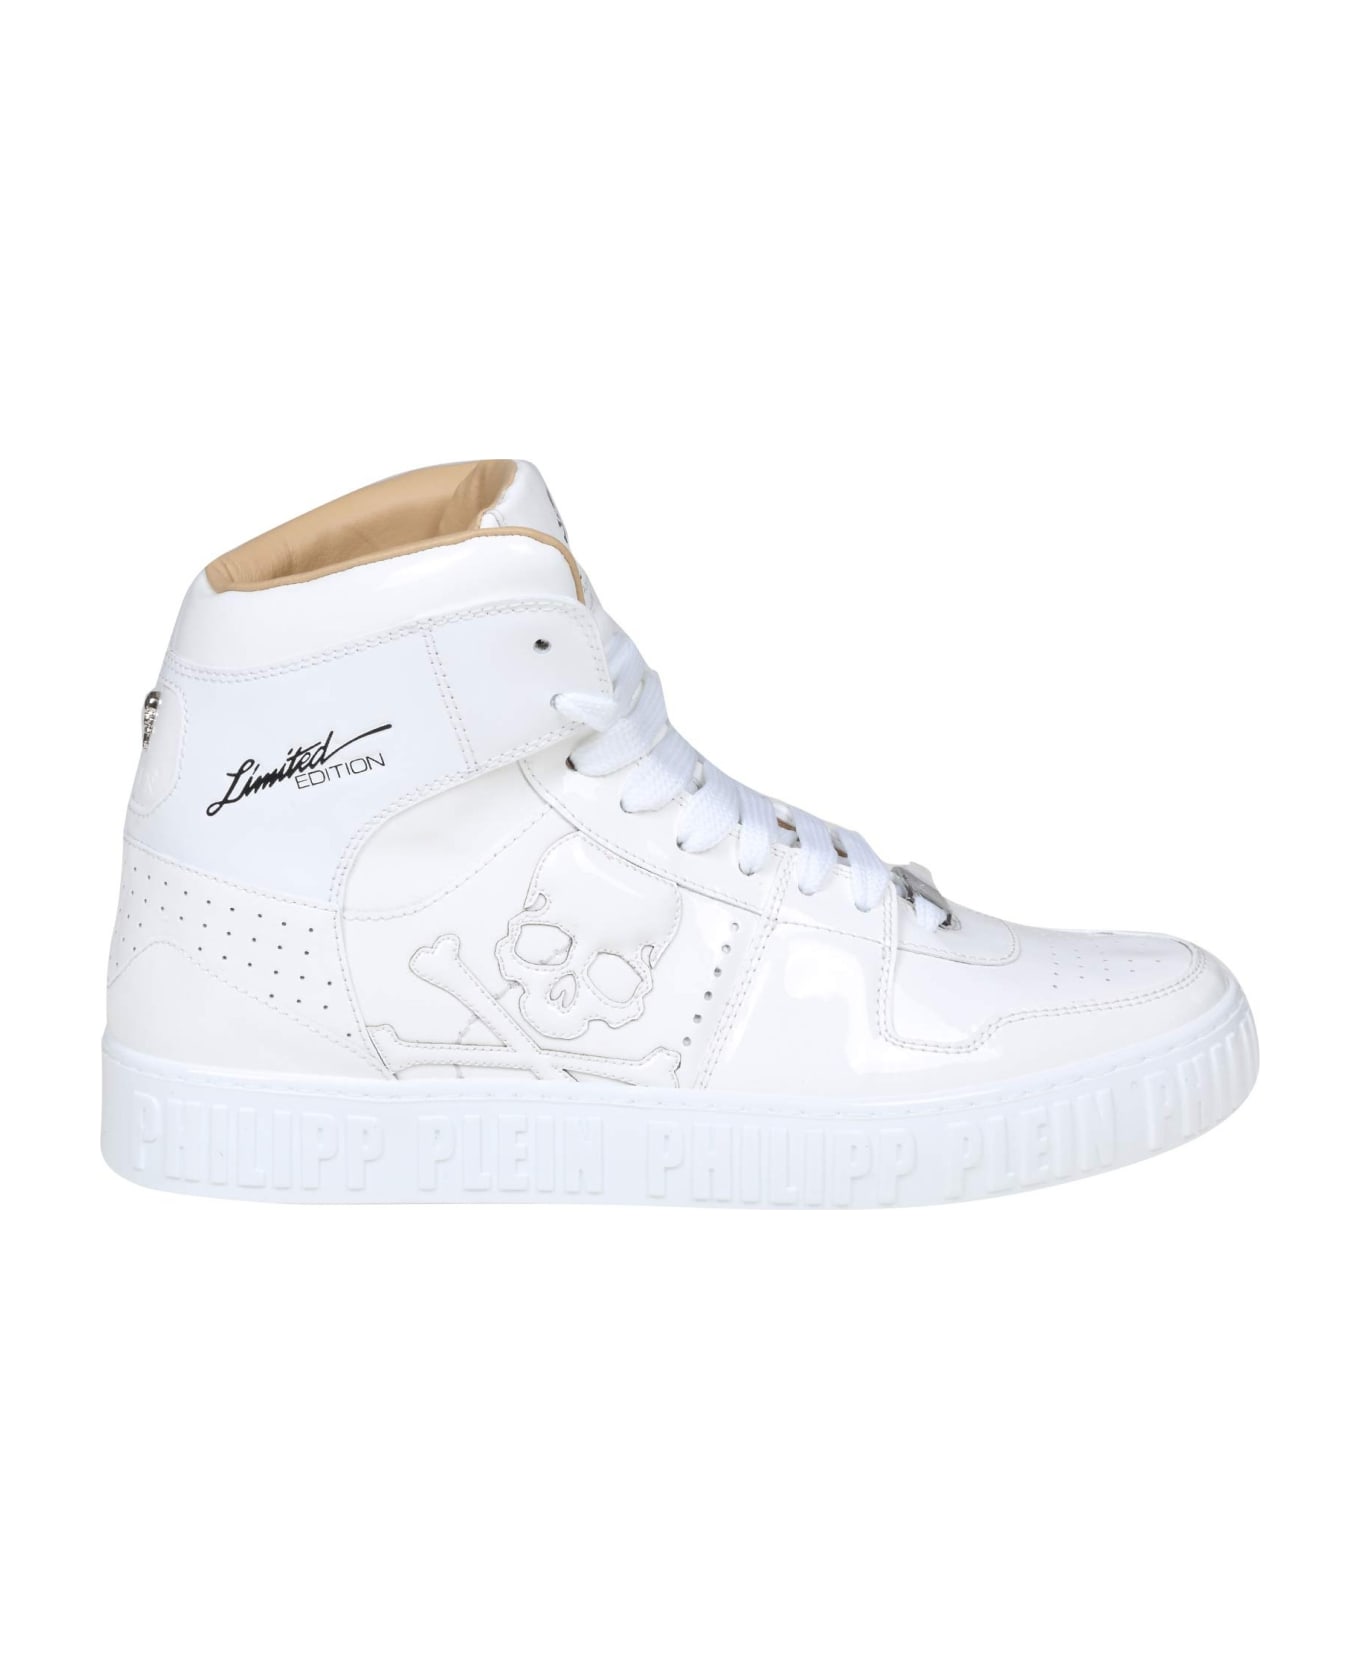 Philipp Plein Snaekers Hi Top In White Leather - White スニーカー